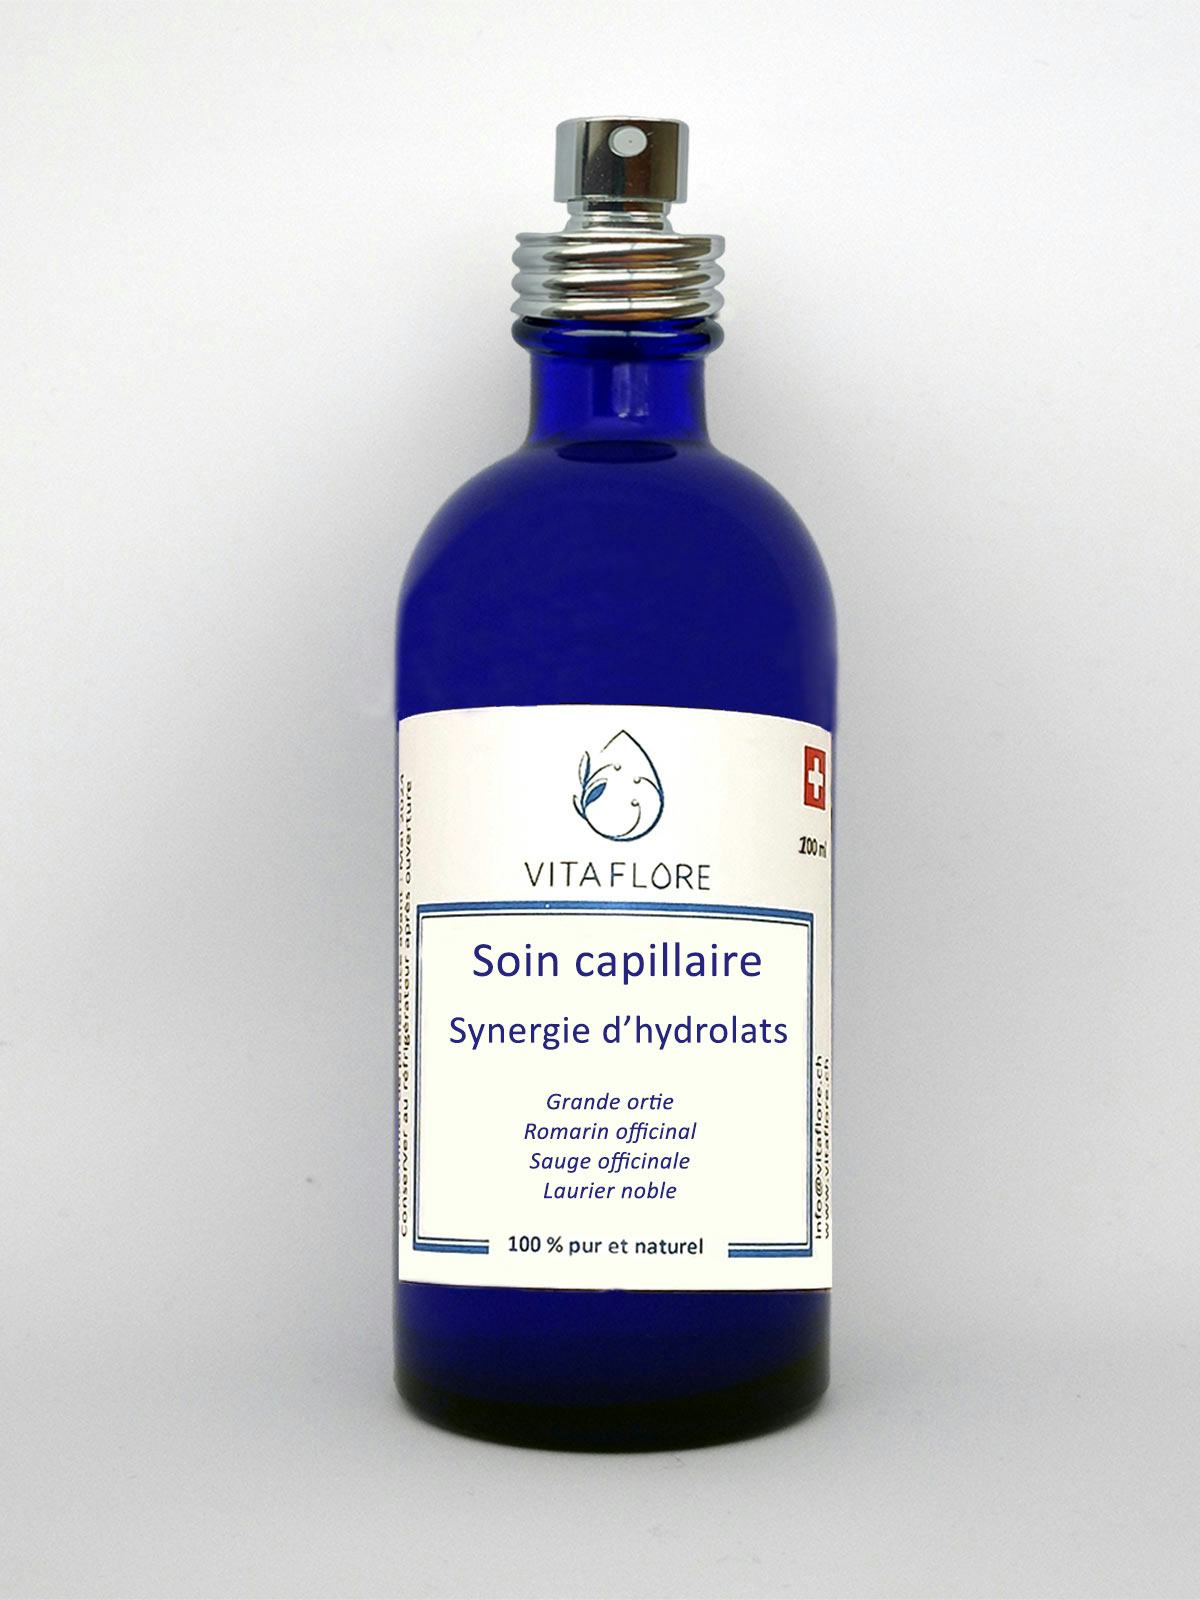 Synergie d’hydrolats – Soin capillaire, artisanal product for direct sale in Switzerland